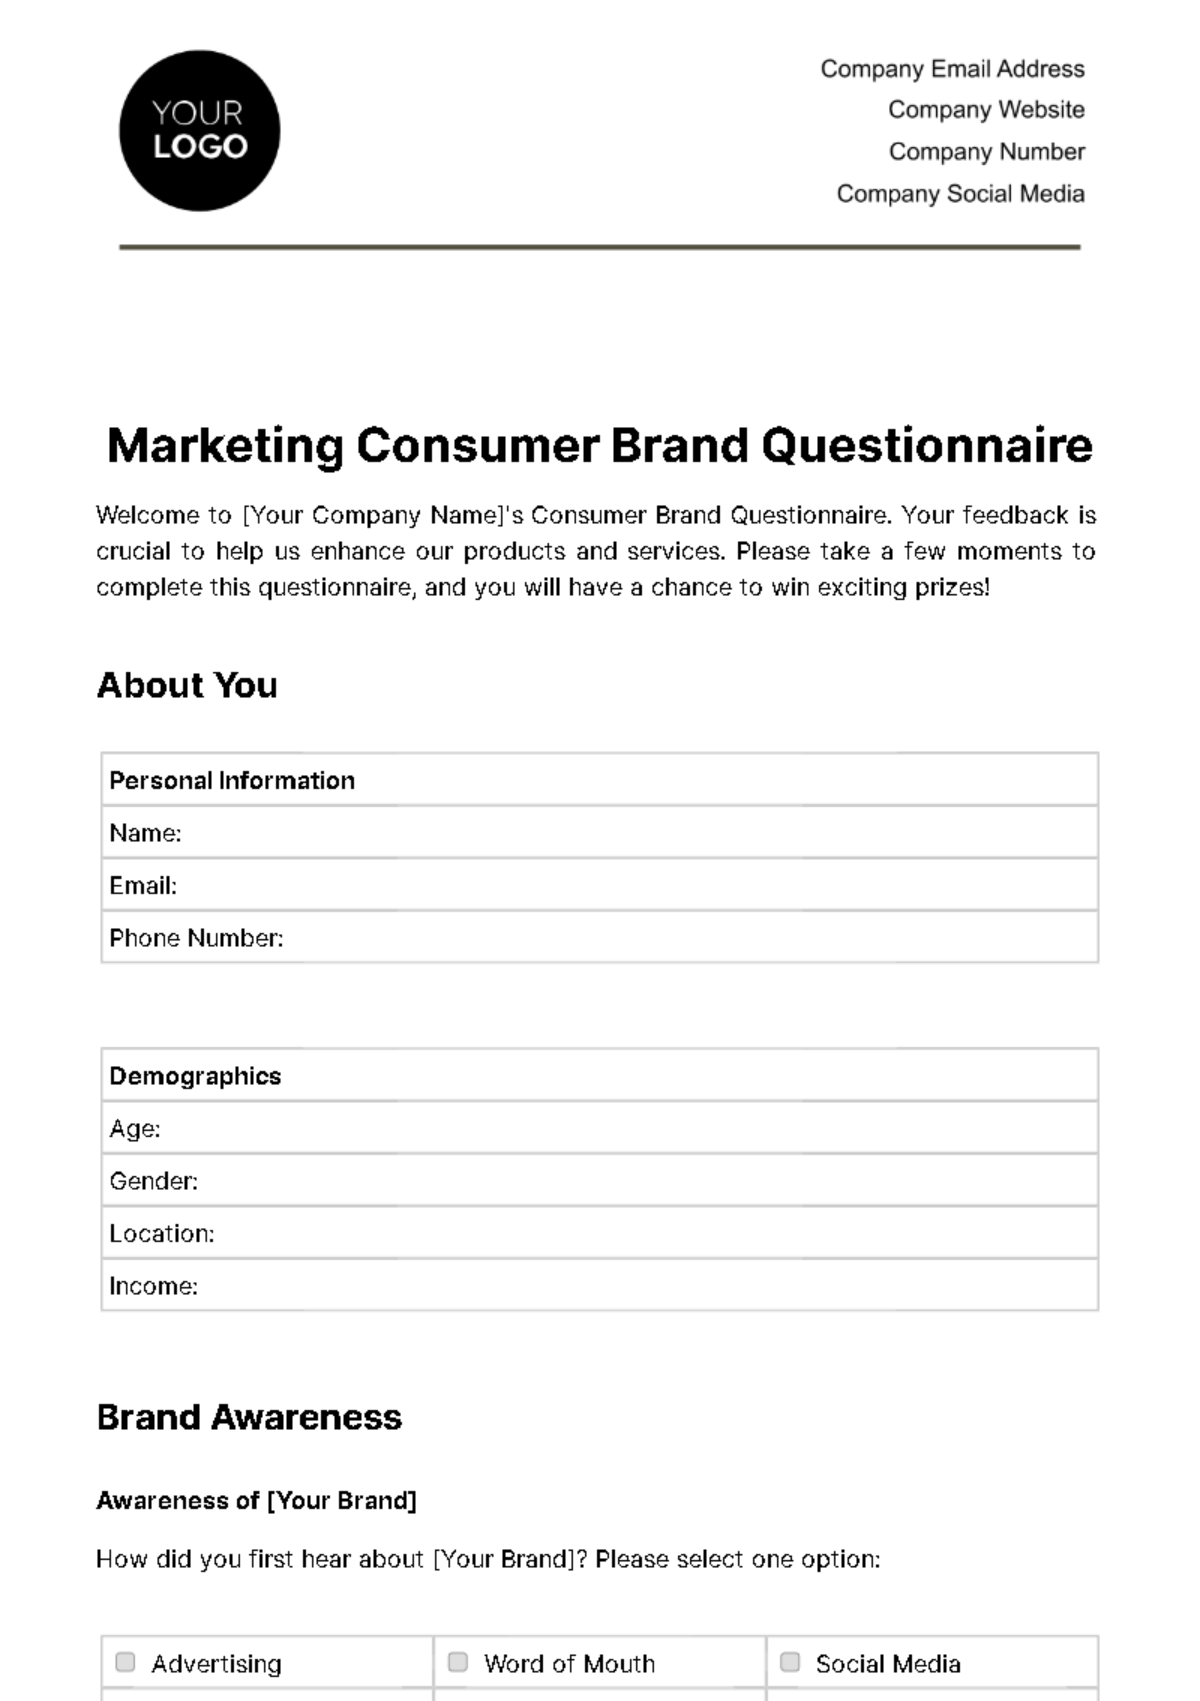 Marketing Consumer Brand Questionnaire Template